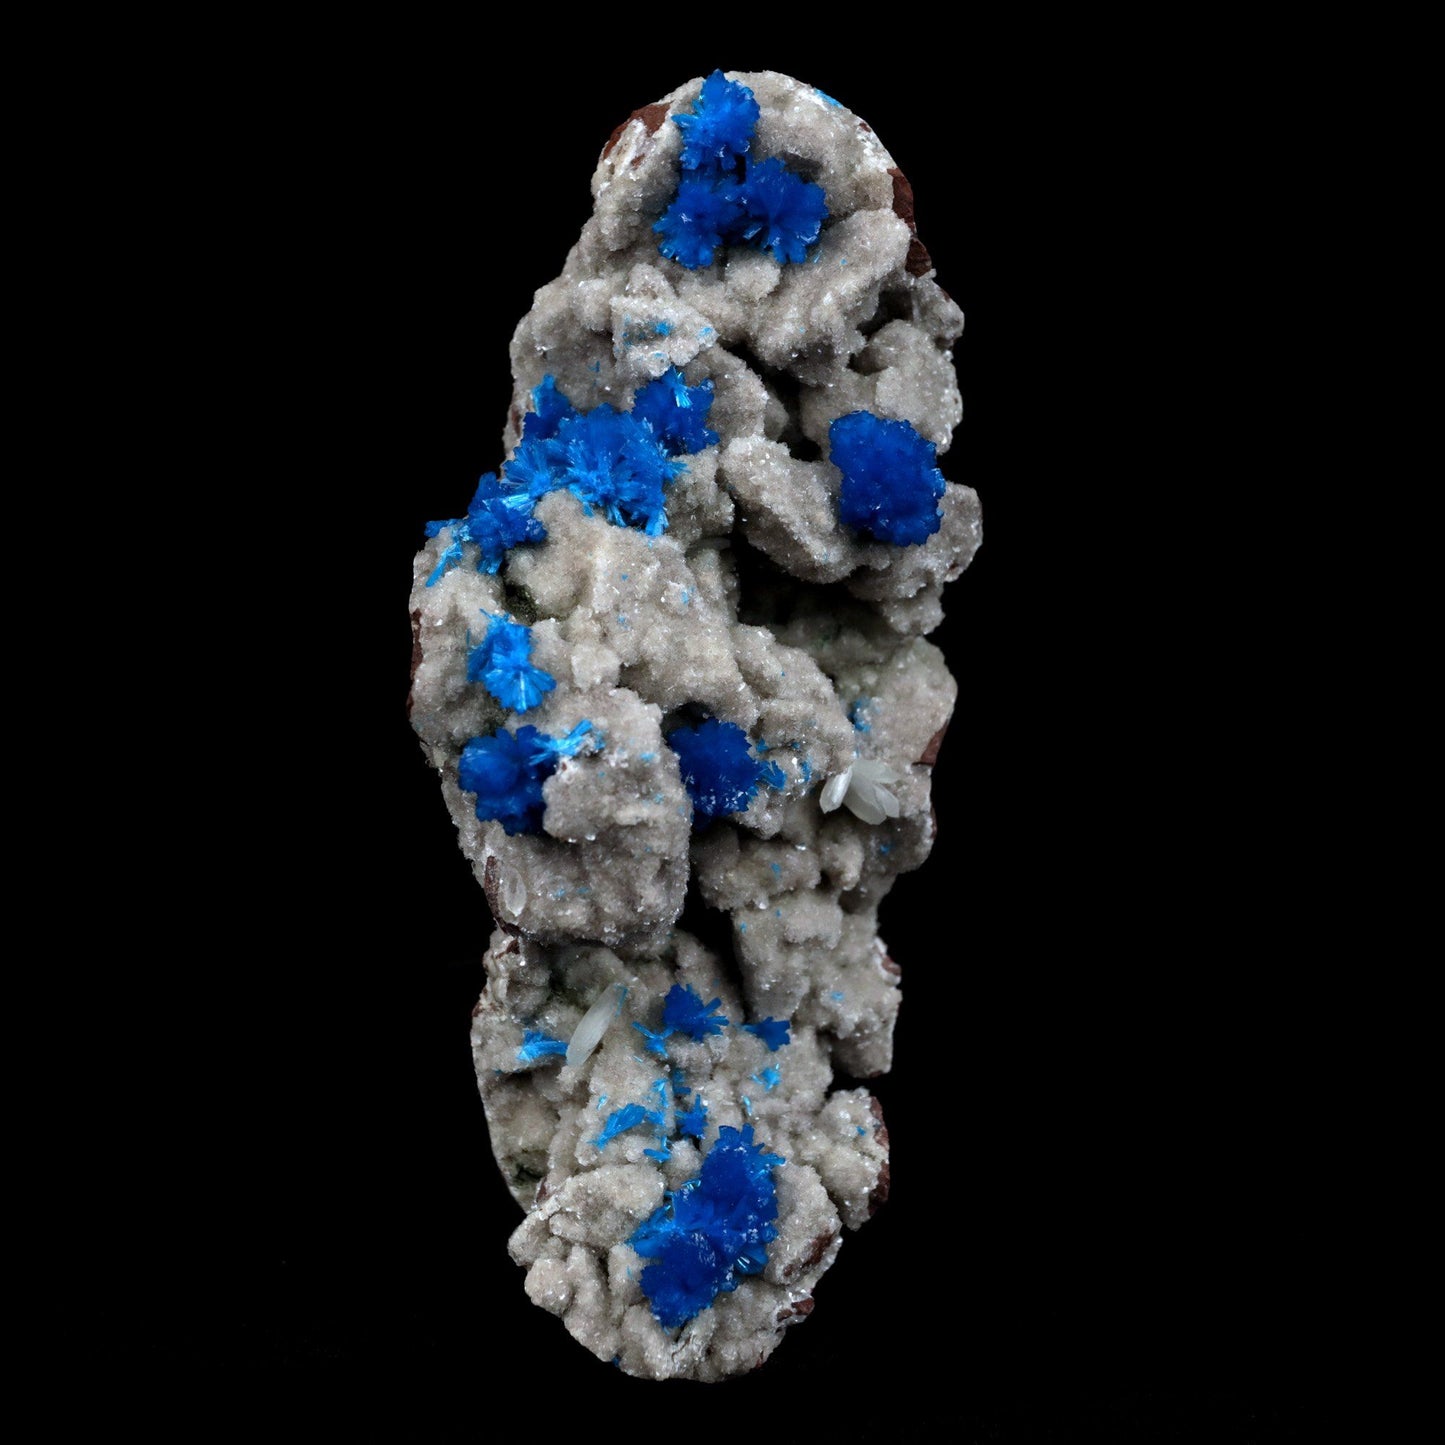 Cavansite Balls on Heuandite Cluster (Rare Find) Natural Mineral Speci…  https://www.superbminerals.us/products/cavansite-balls-on-heuandite-cluster-rare-find-natural-mineral-specimen-b-4870  Features: This magnificent piece is composed of a radial group of superb deep blue Cavansite crystals on basalt, You can see several various forms of crystallisation in this piece, all of which have the same, strong, saturated blue colour that is honestly SO blue that it appears to be a fake